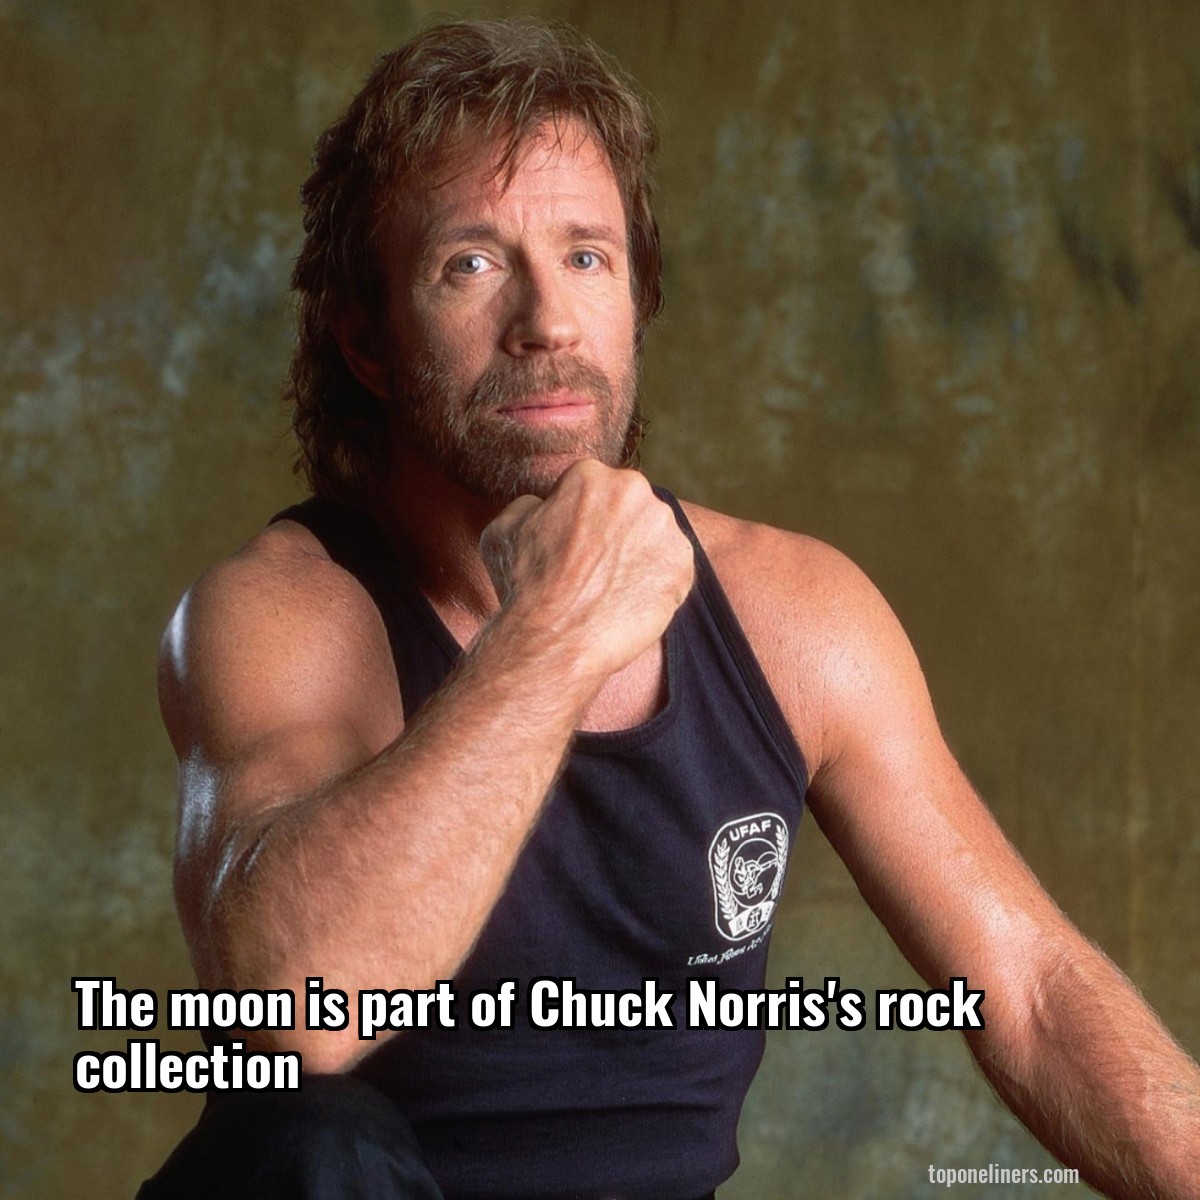 The moon is part of Chuck Norris's rock collection